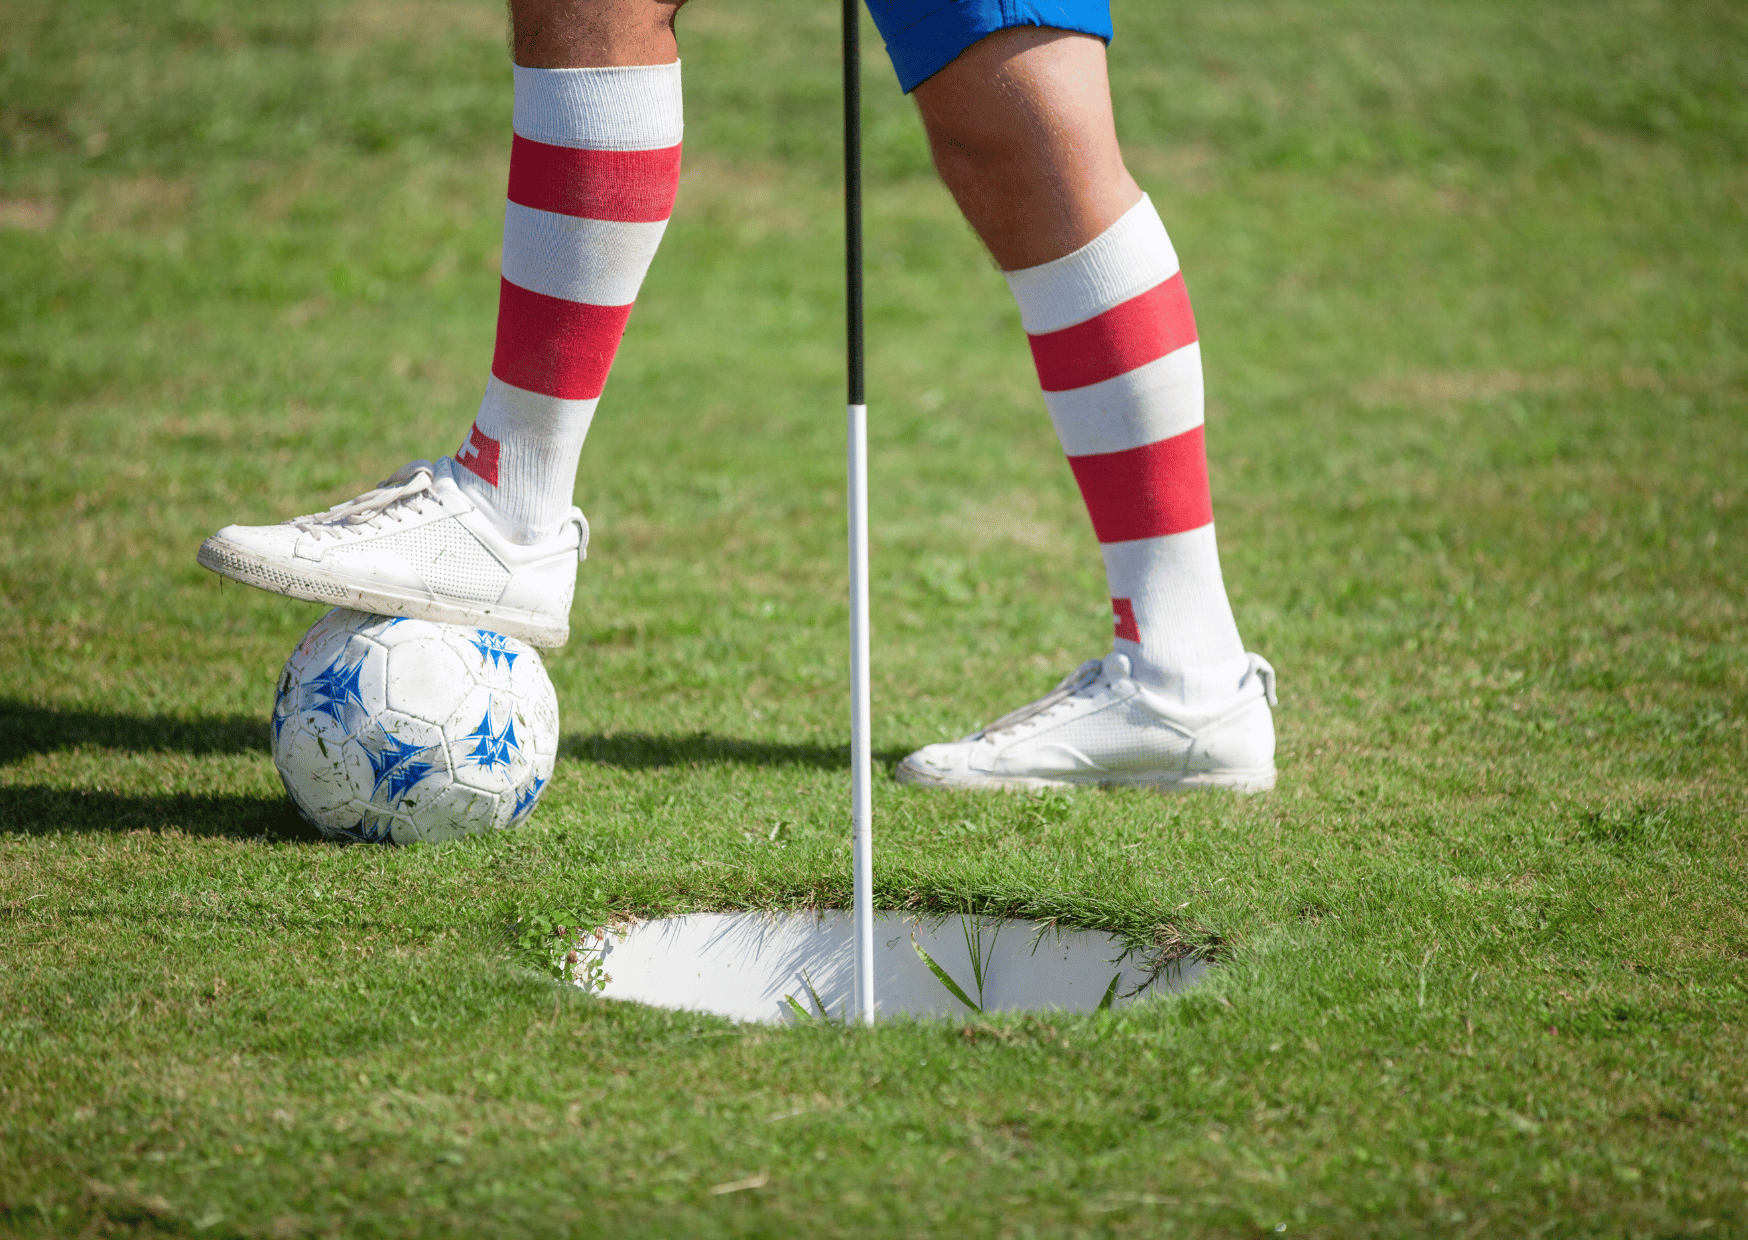 Invicta Dynamos Footgolf Cup: A Fun-Filled Day of Sport and Community Spirit